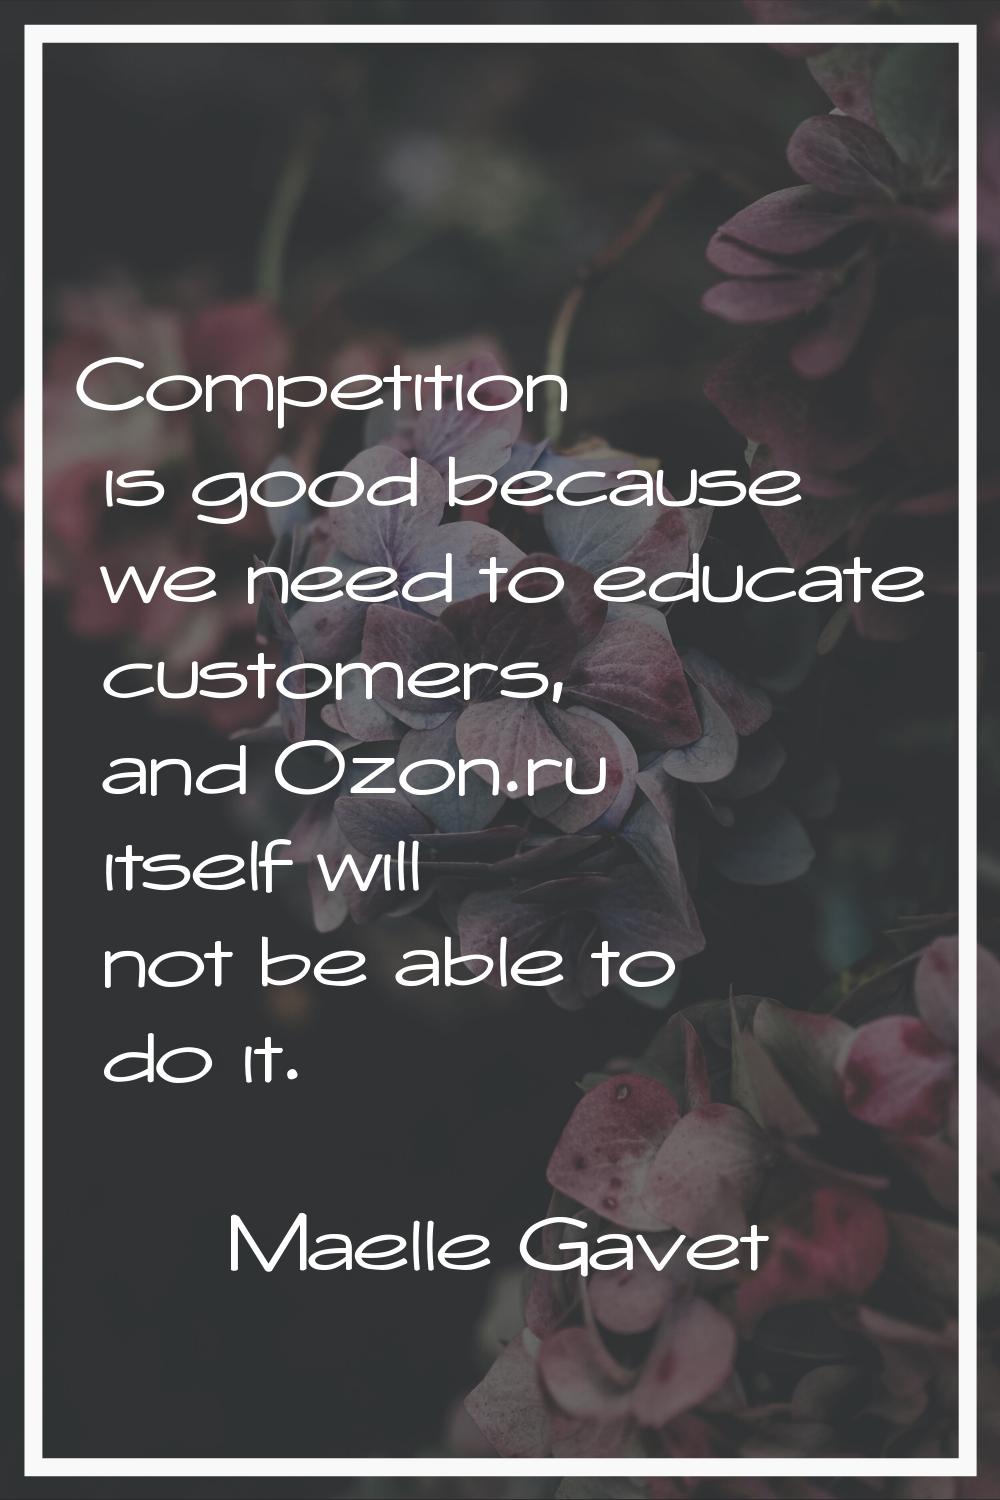 Competition is good because we need to educate customers, and Ozon.ru itself will not be able to do